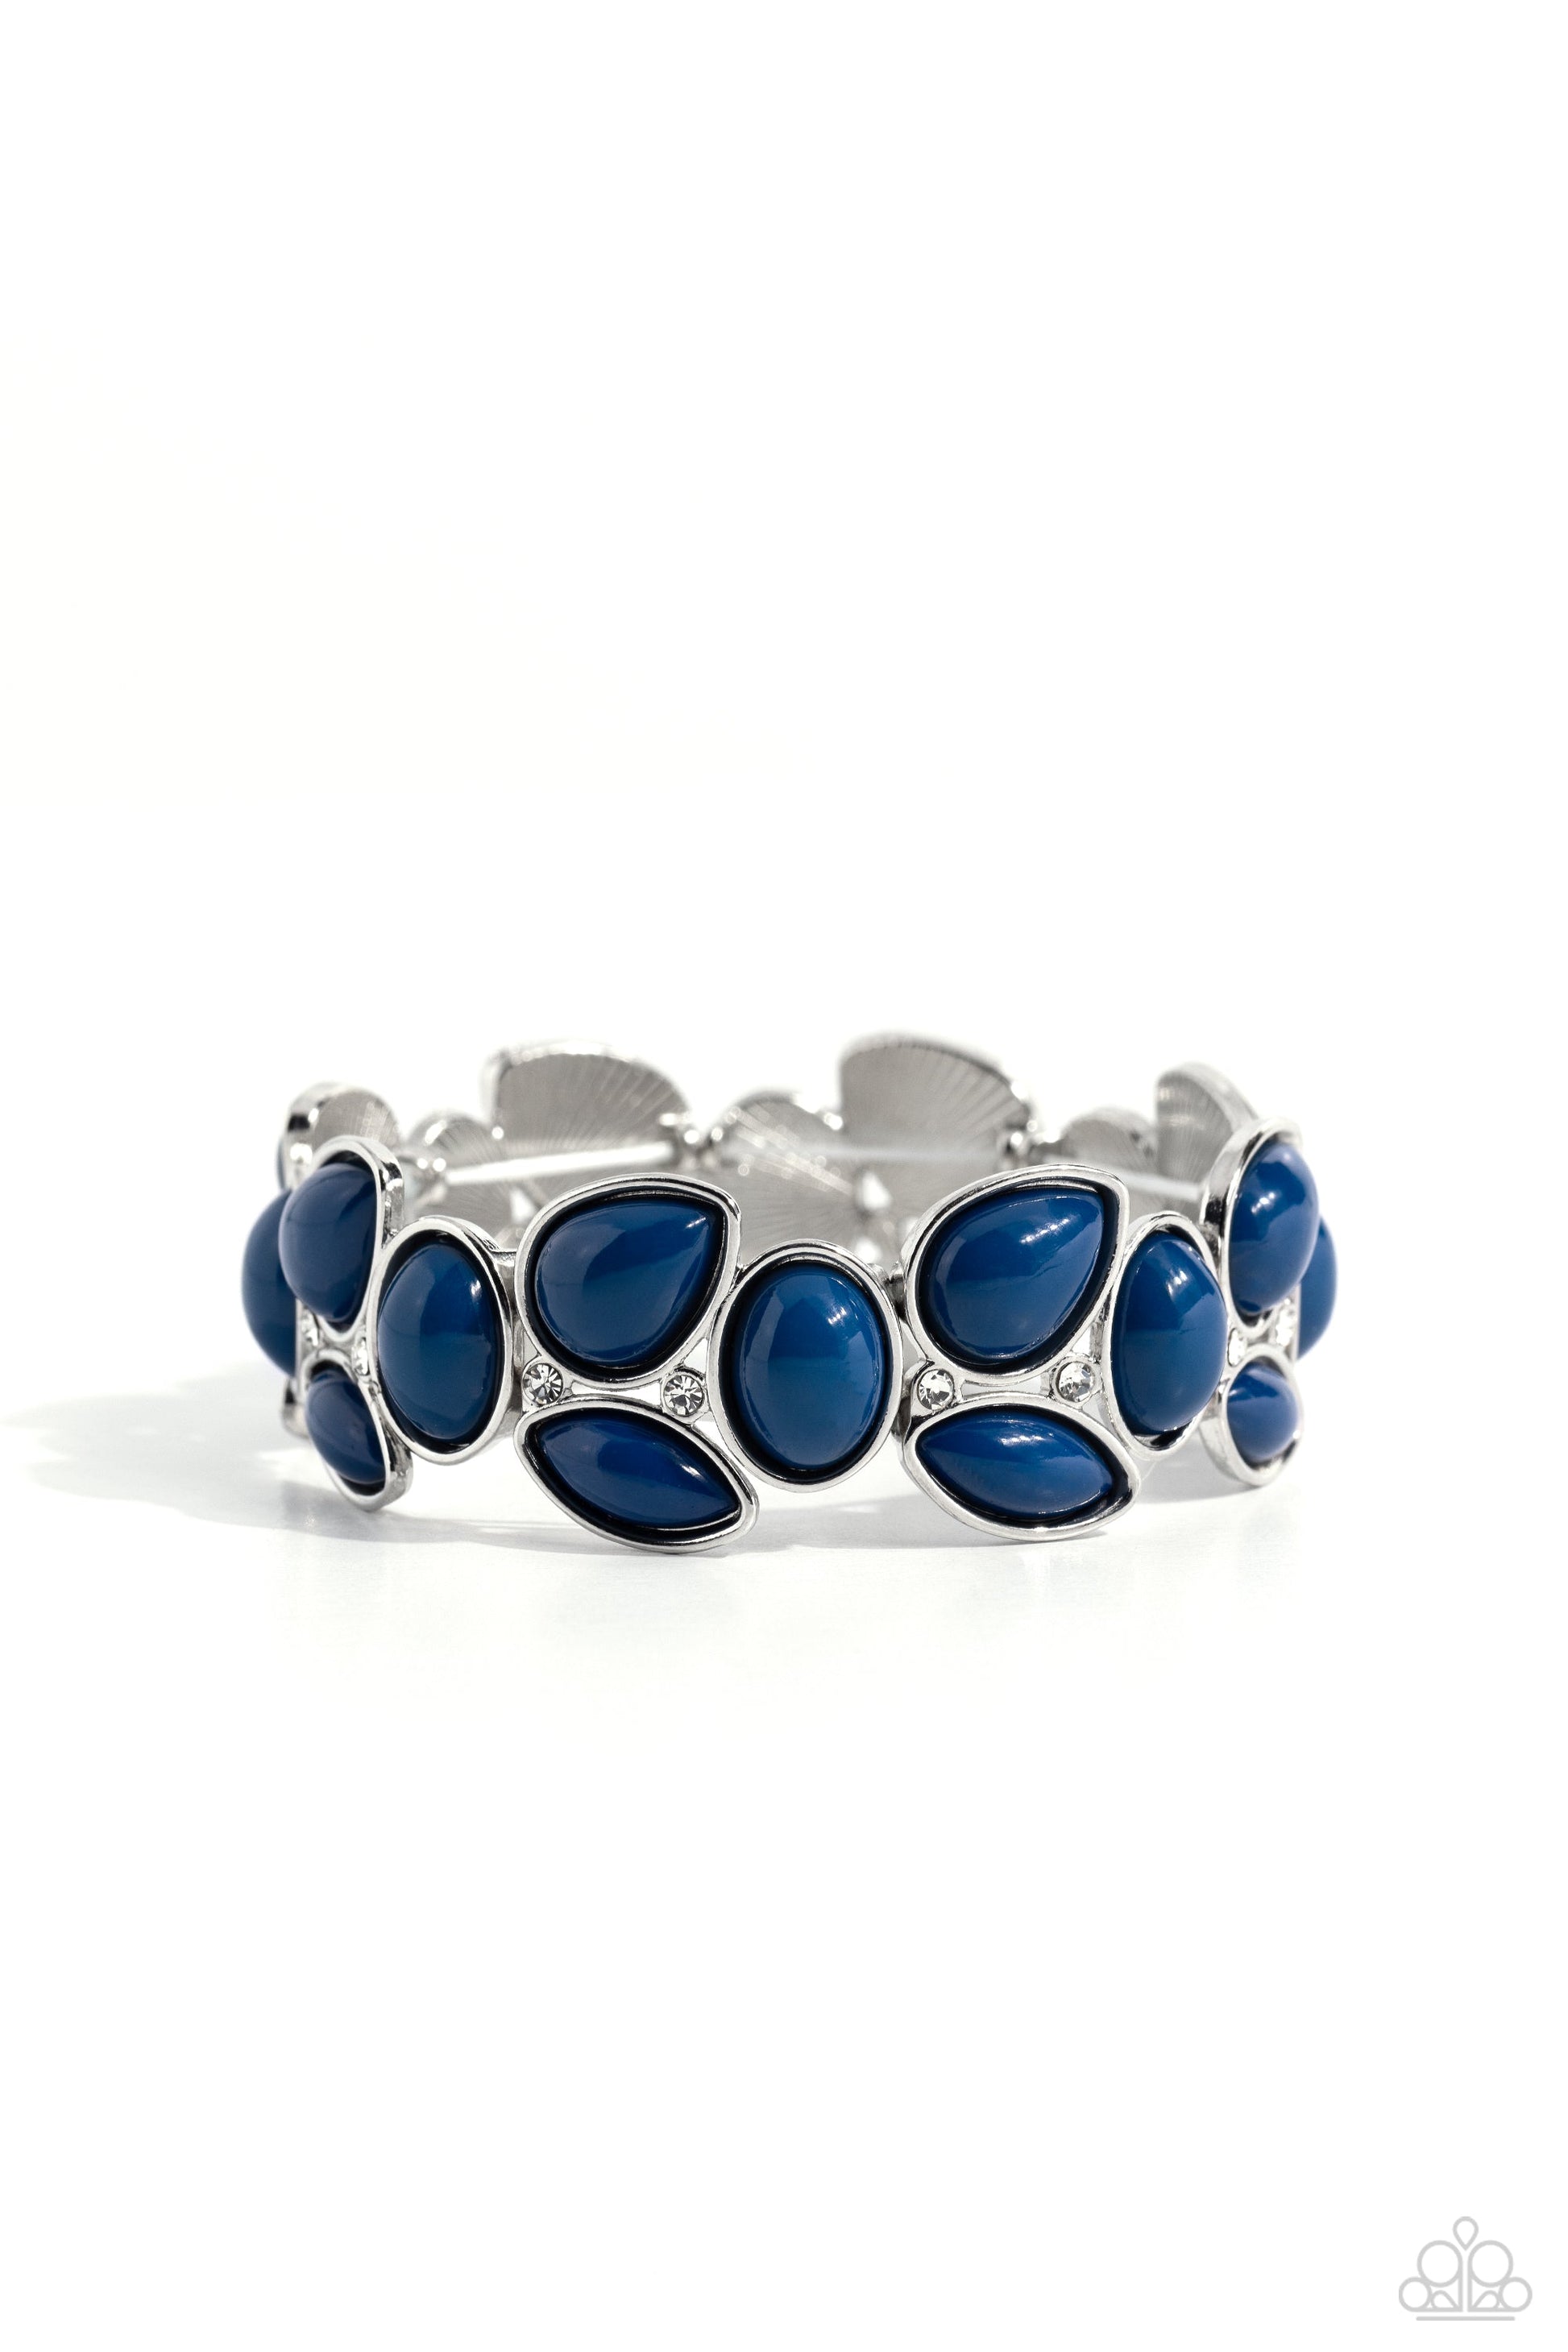 Gondola Groves - Blue and Silver Bracelet - Paparazzi Accessories - Glassy white rhinestones are sprinkled between bubbly clusters of Mykonos Blue oval, teardrop, and marquise shaped beads that are threaded along stretchy bands around the wrist for a colorfully leafy finish. Sold as one individual bracelet.